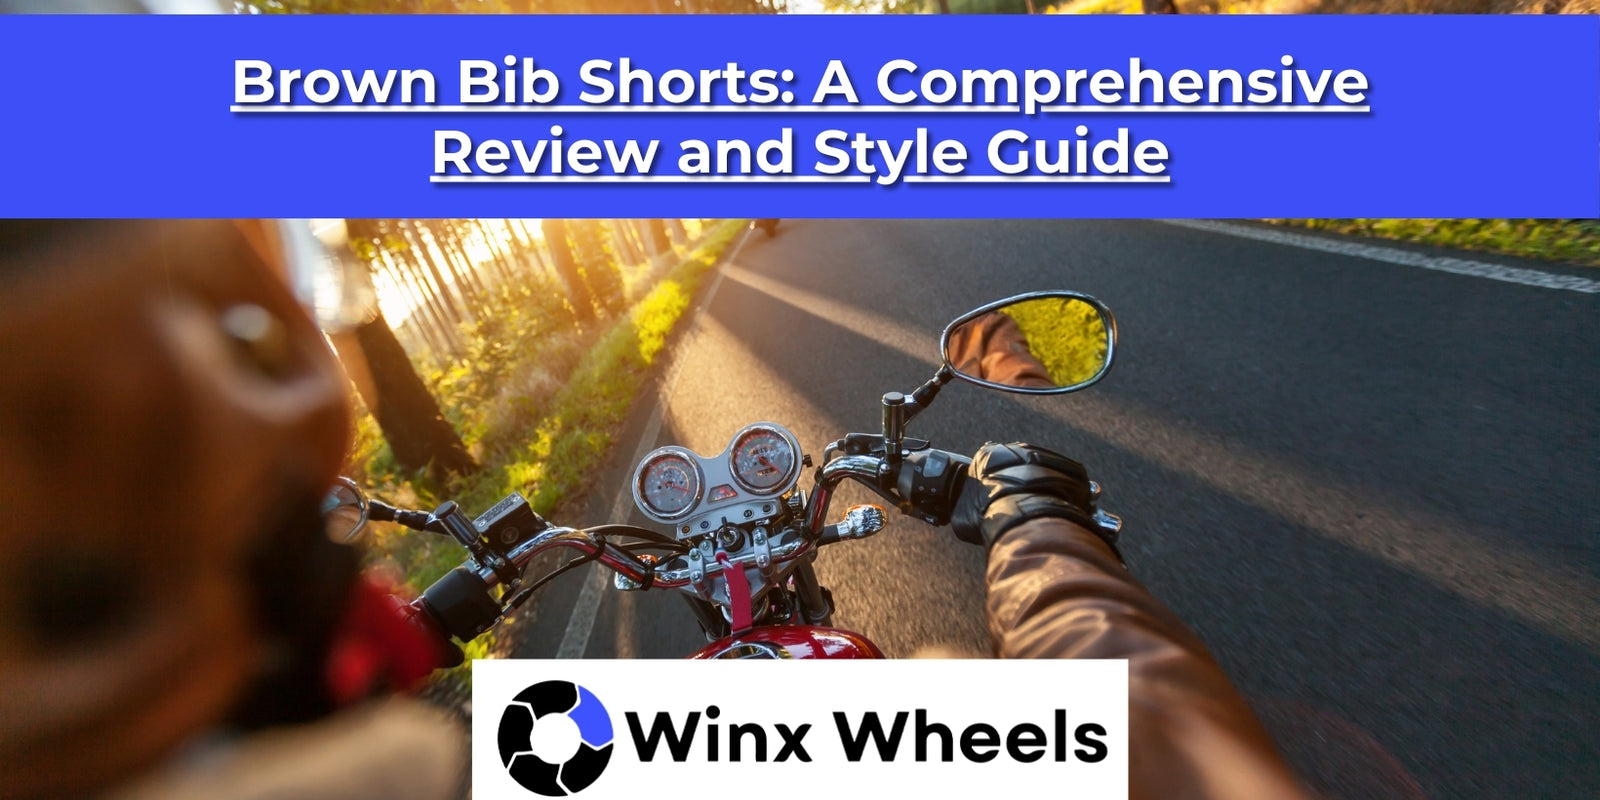 Brown Bib Shorts: A Comprehensive Review and Style Guide